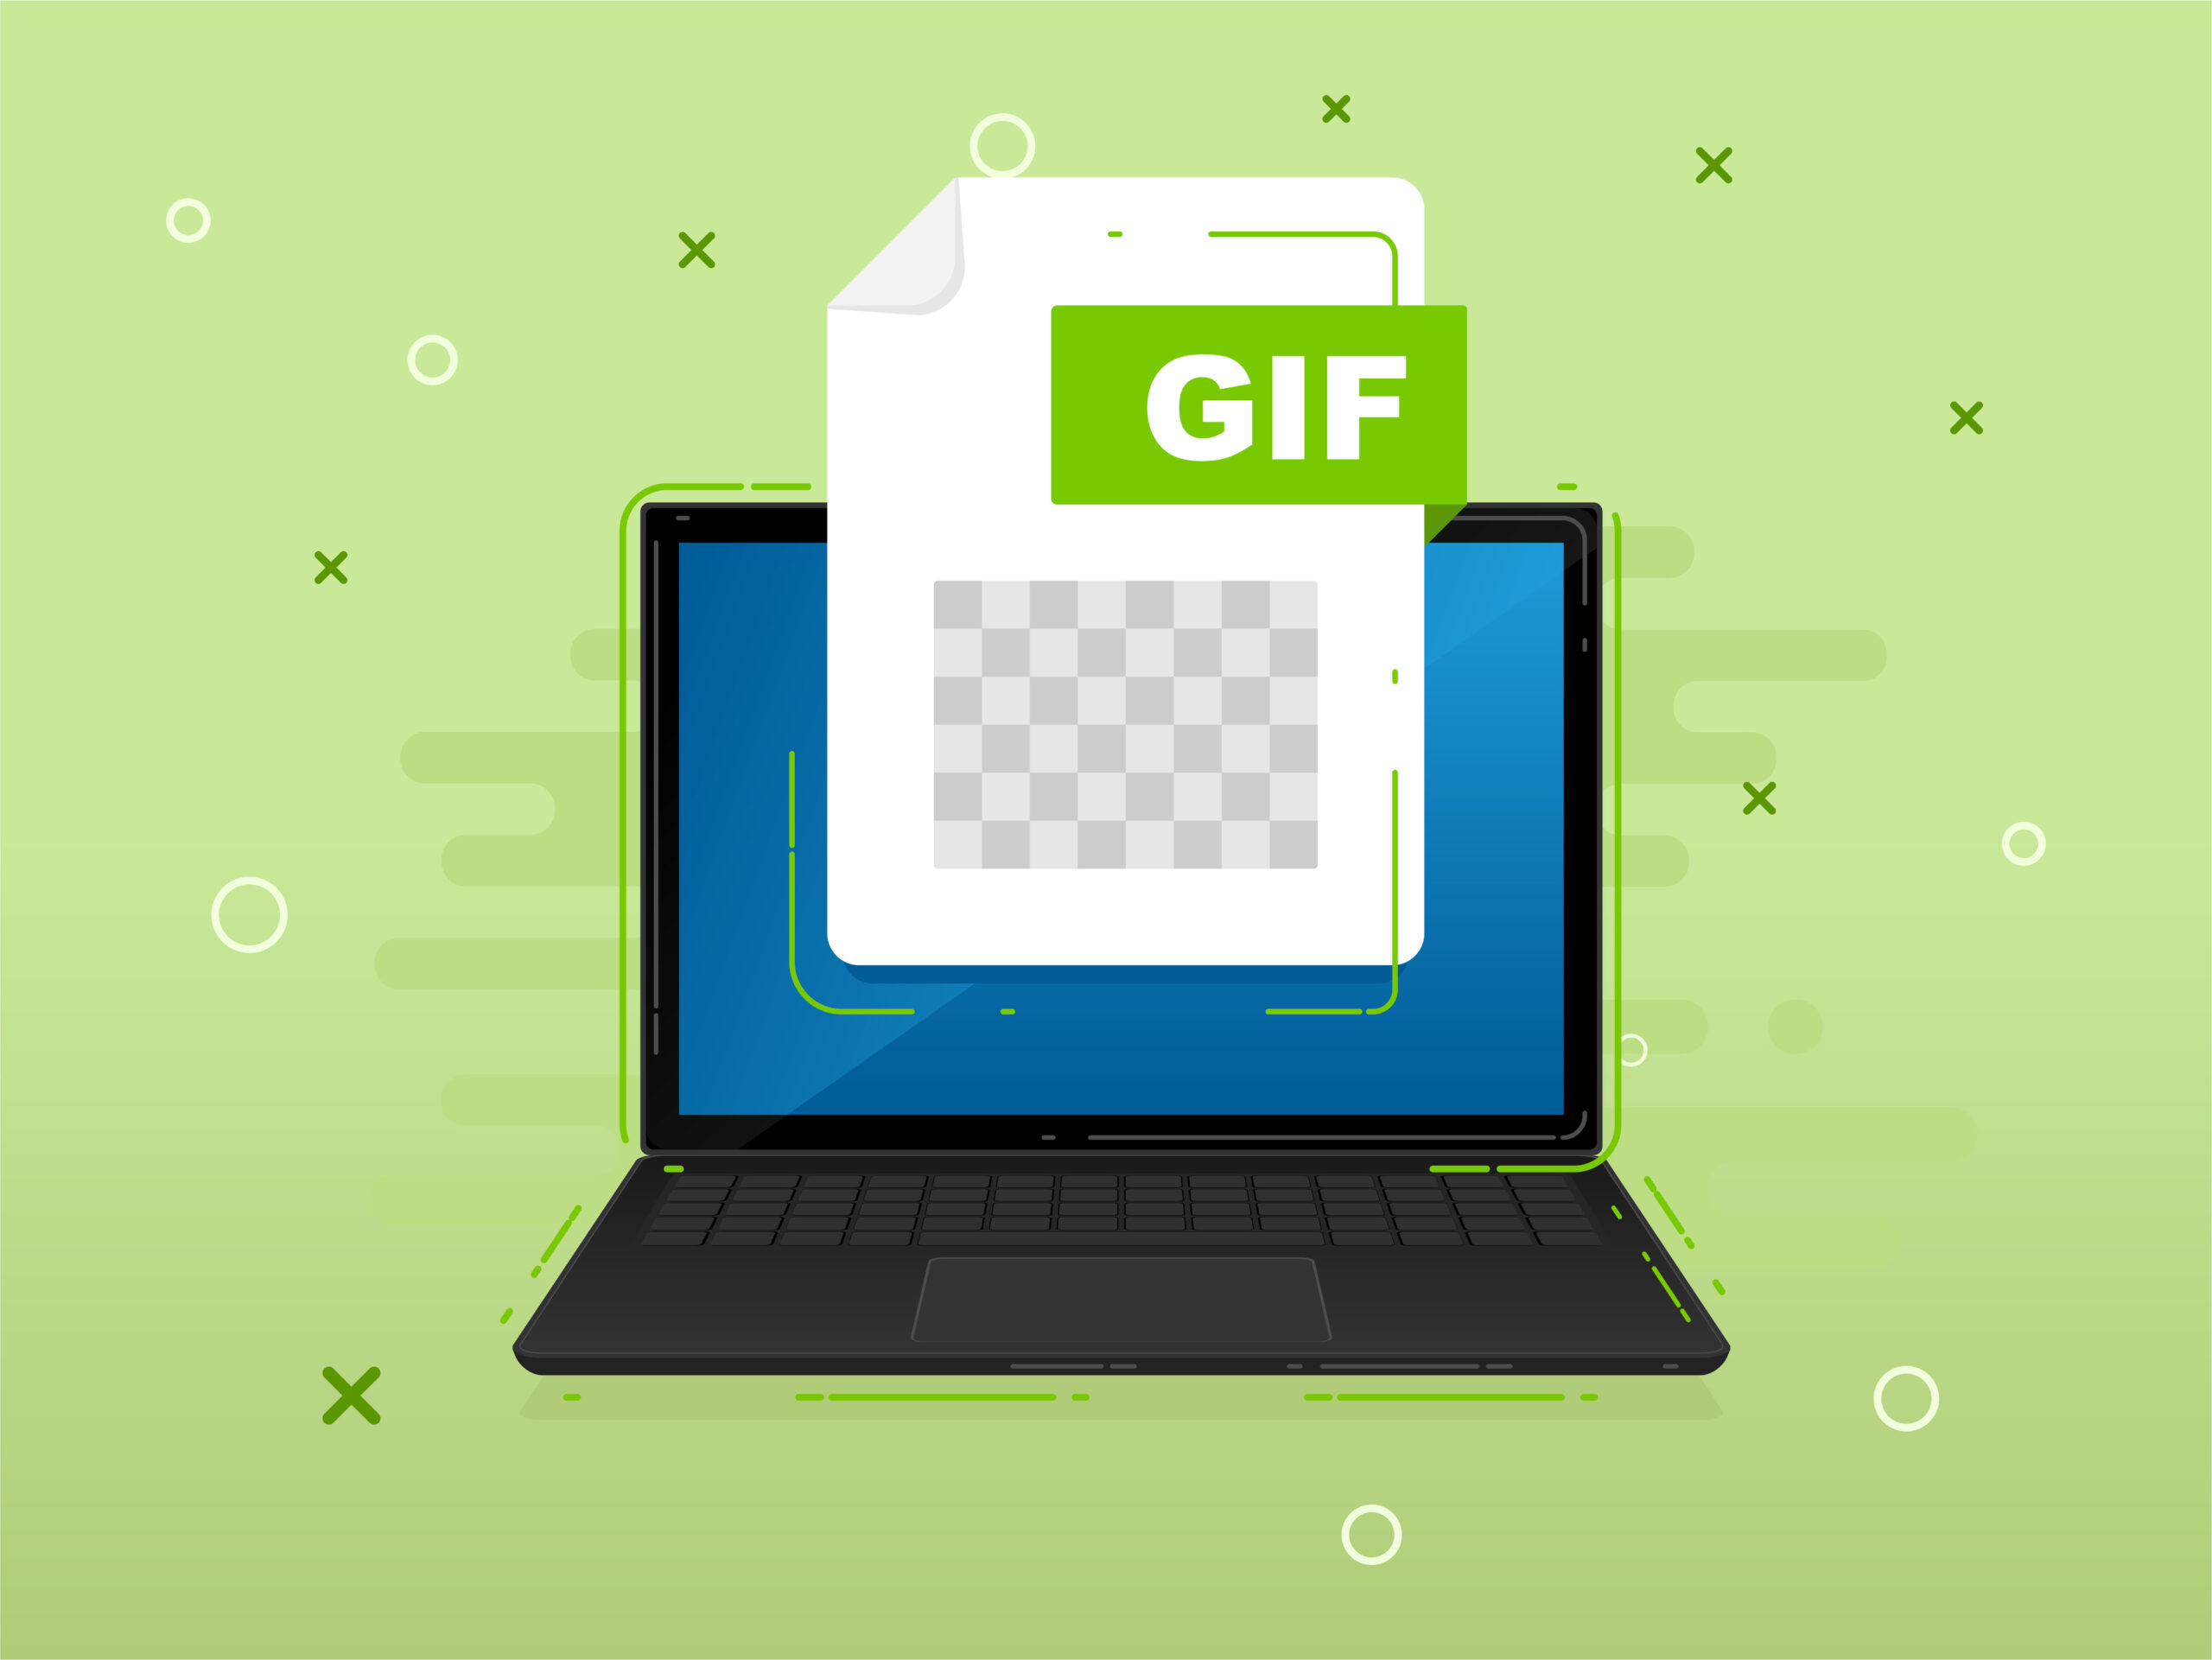 Gif Animator, Movie and Slide Show Creator - SSuite Office Software  An  easy to use gif maker, animator, movie, and slide show creator. Make Gif  animations with just one click of